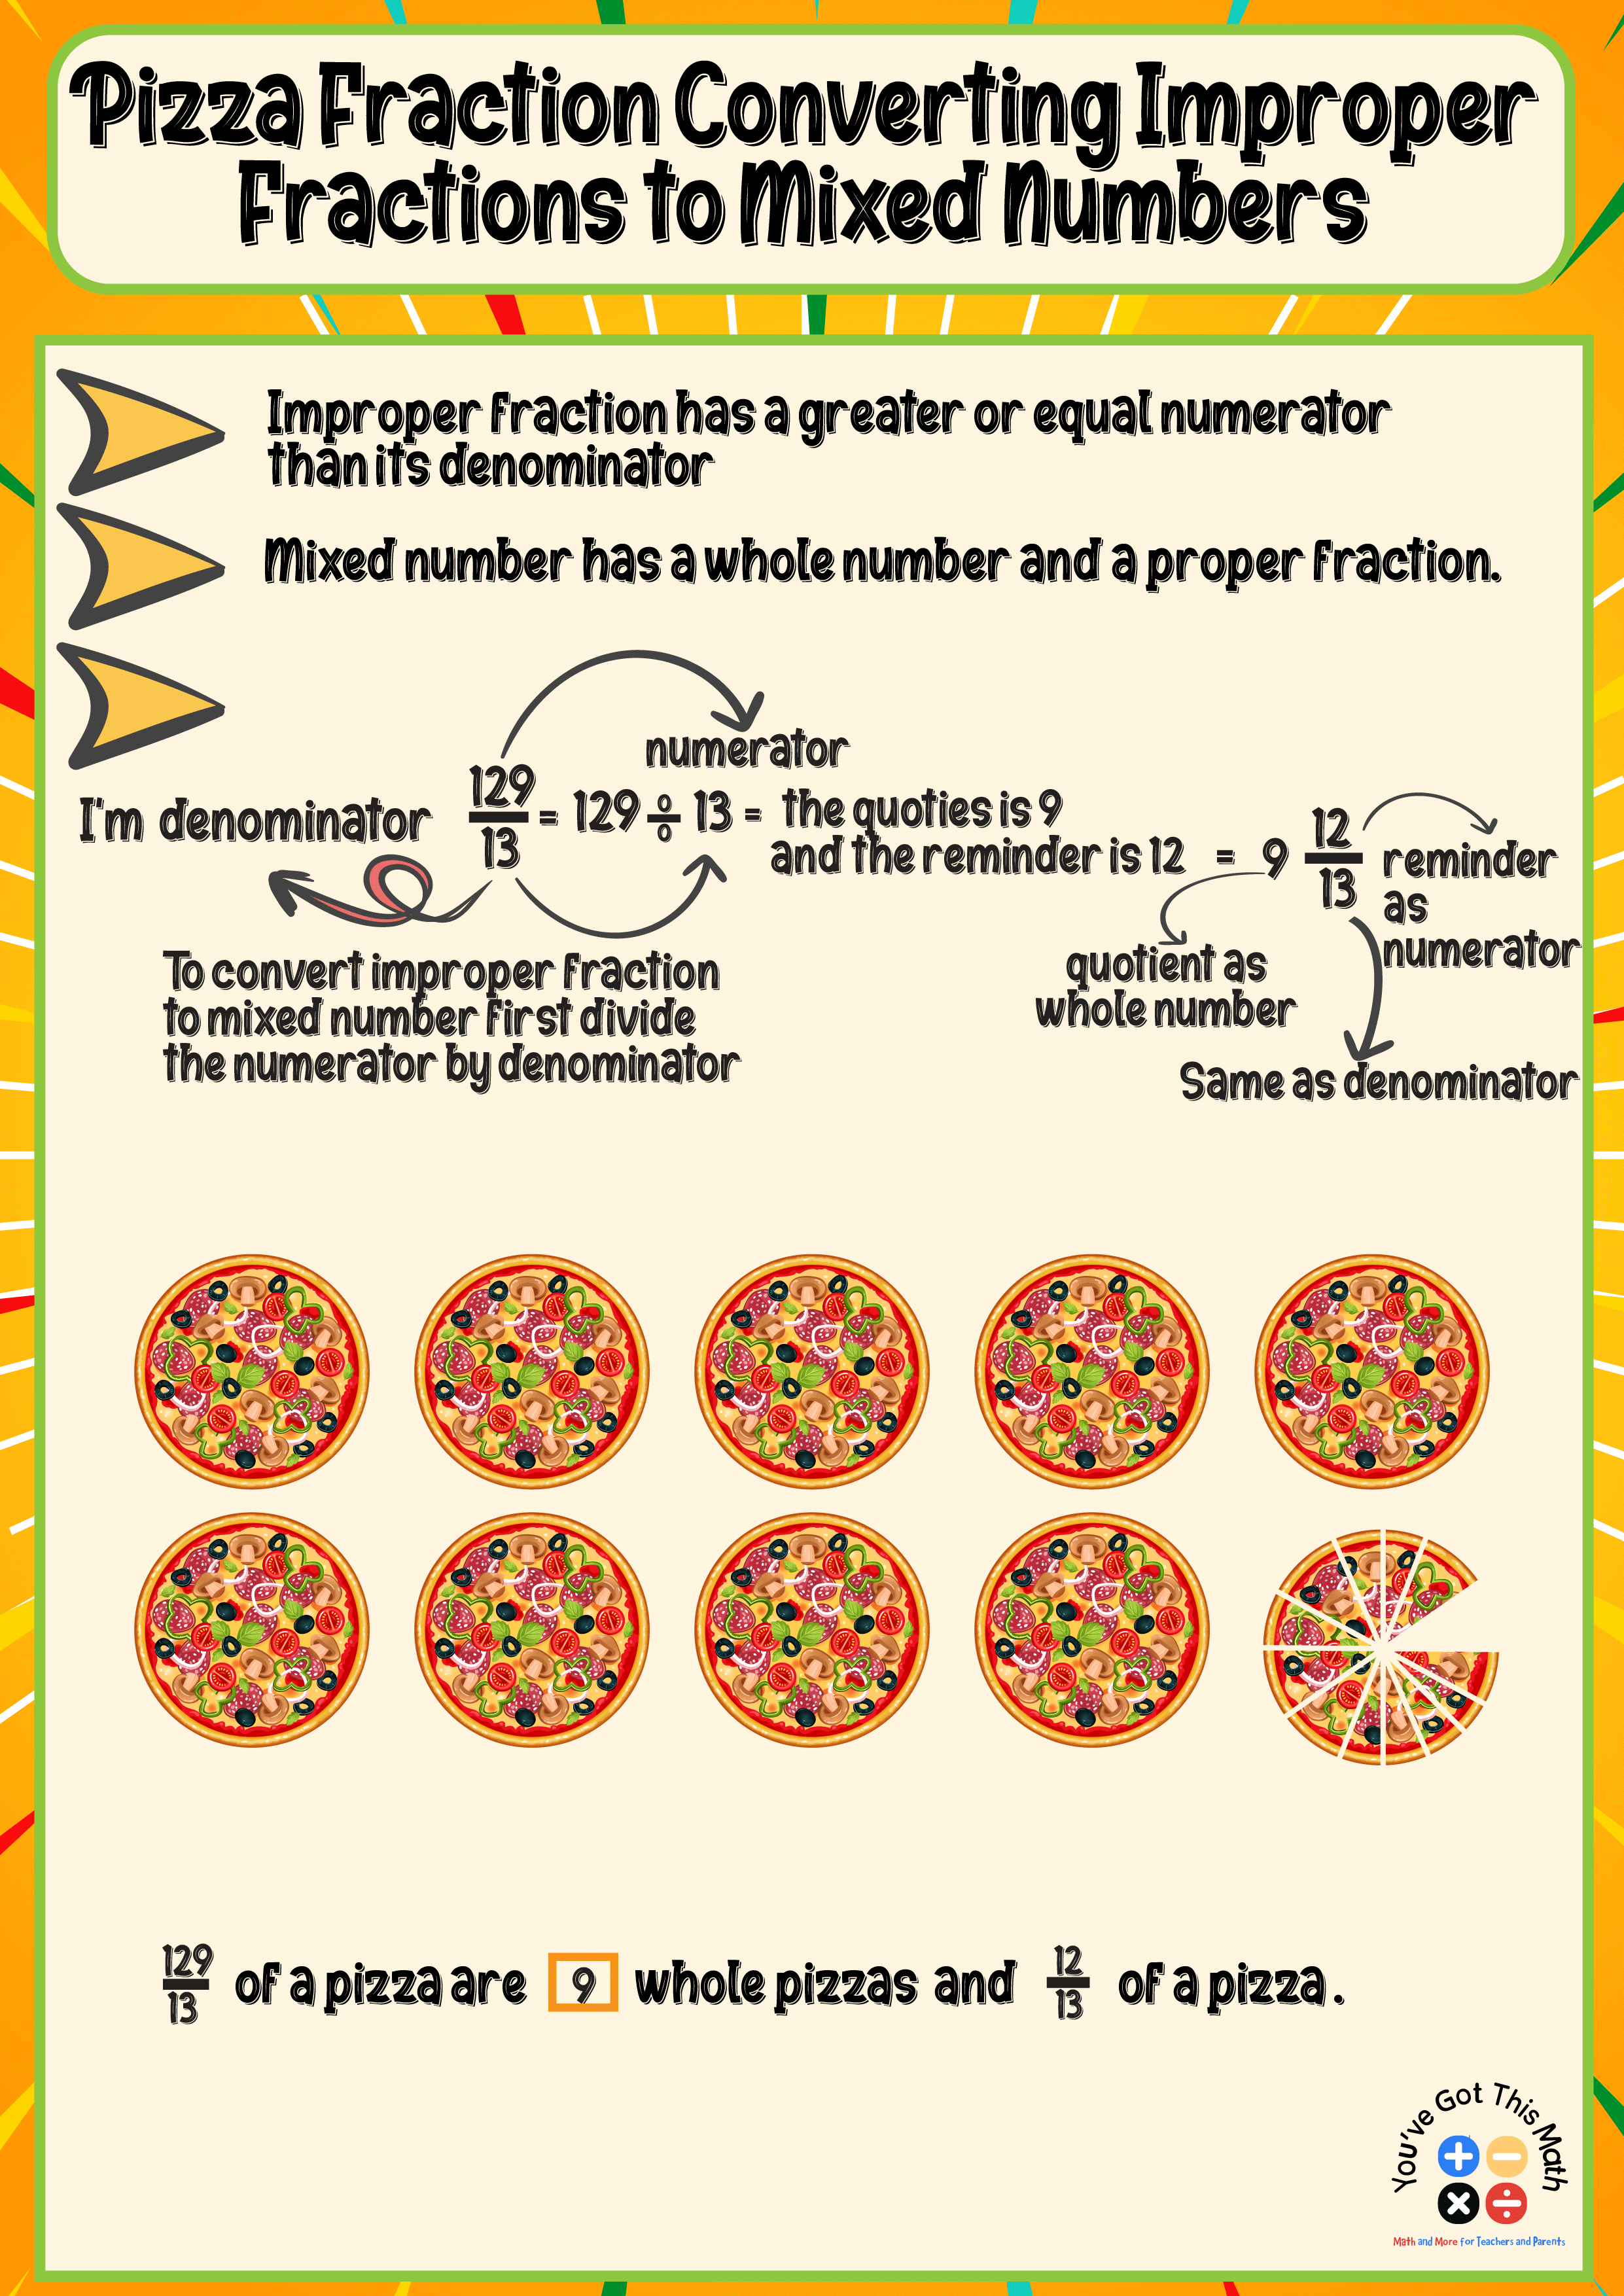 using pizza fraction to learn converting improper fractions to mixed numbers